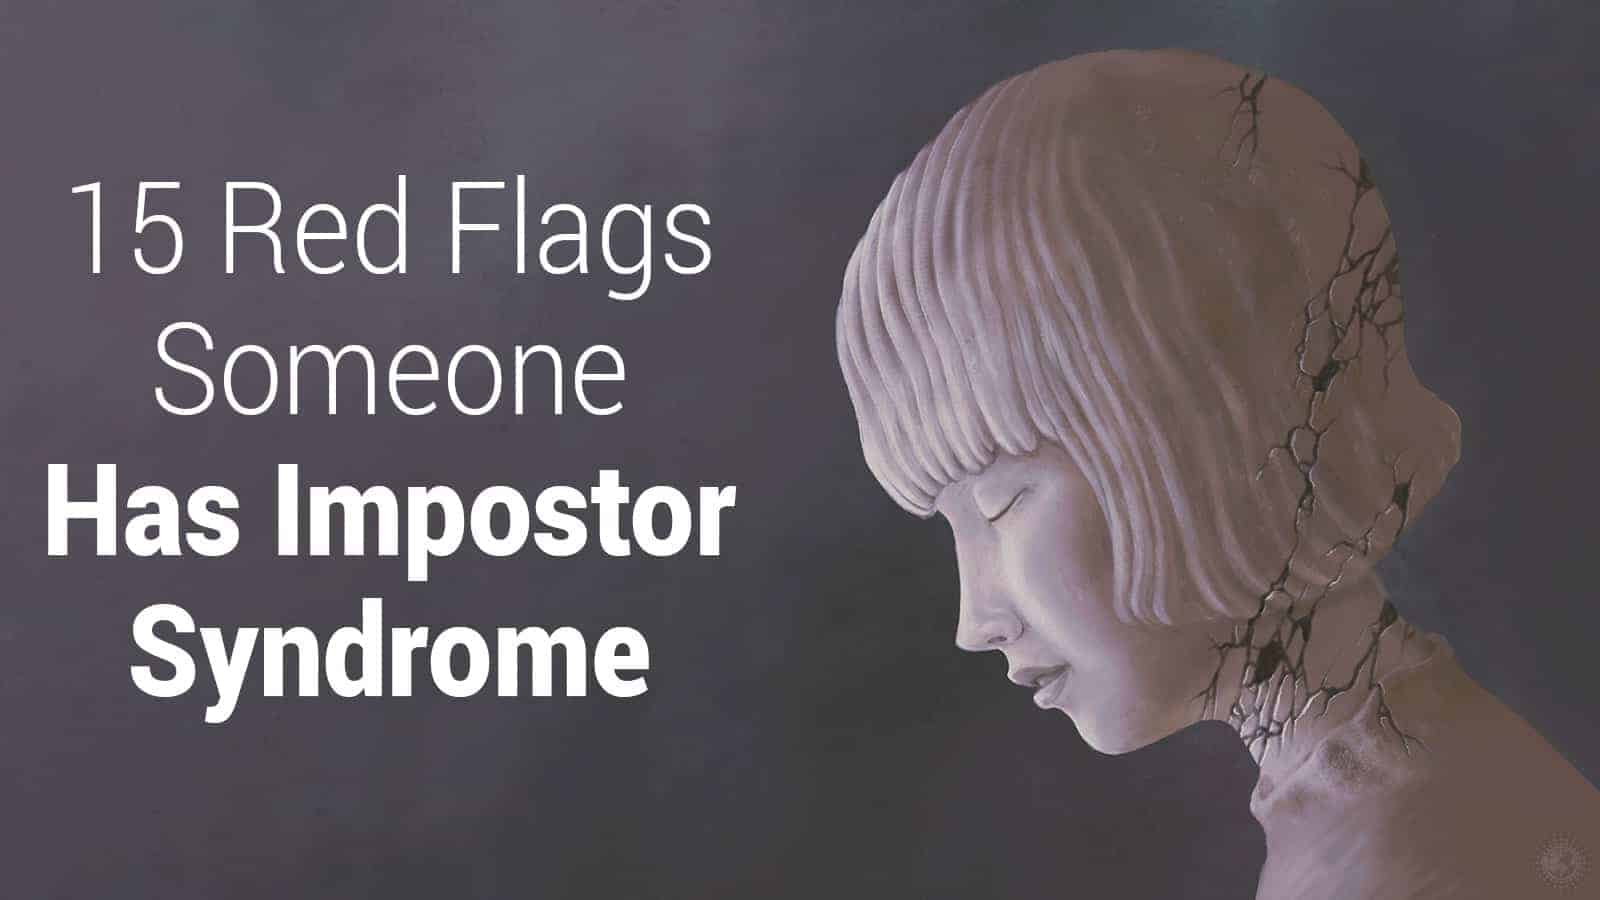 15 Red Flags Someone Has Impostor Syndrome